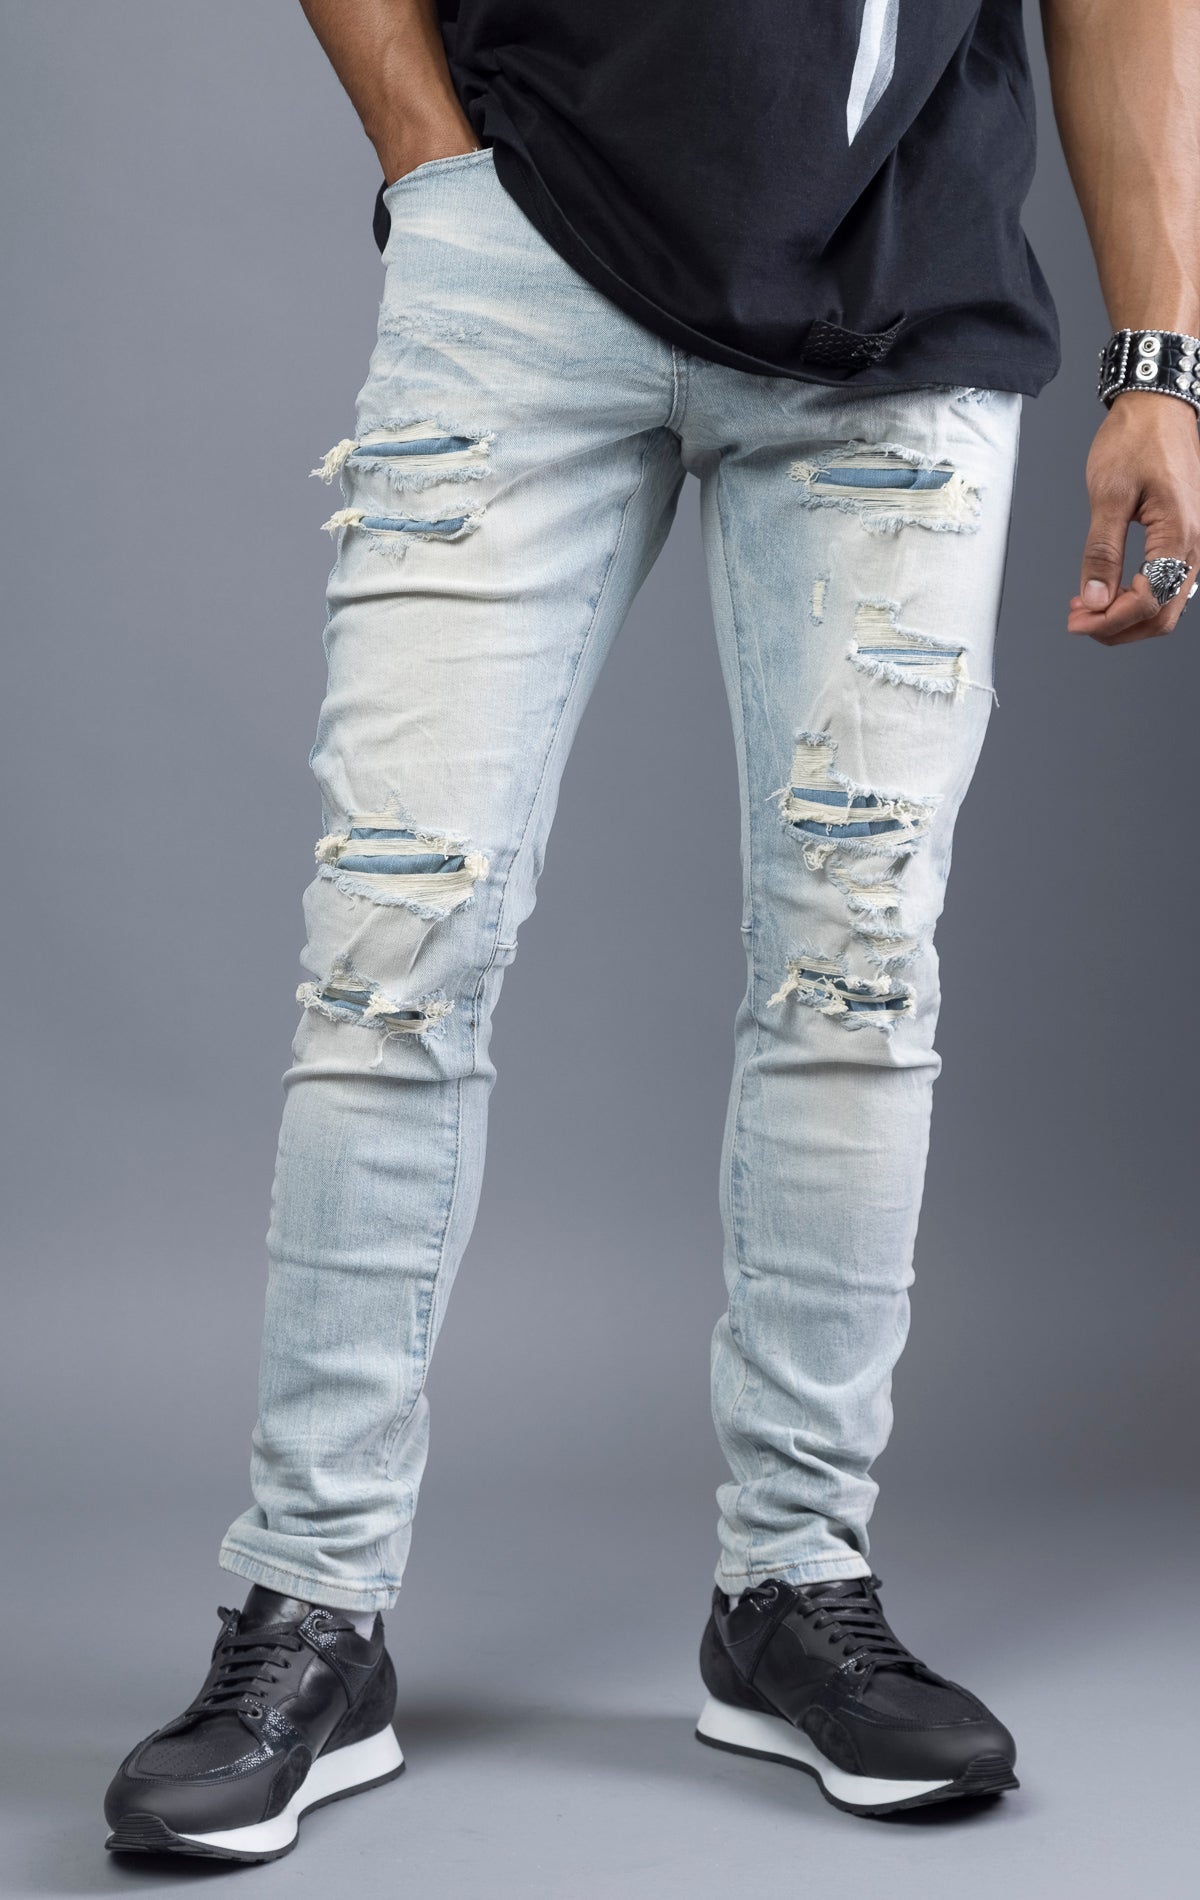 Light blue, slim-fit denim jeans with ripped and repaired patches throughout. Made with stretchy denim fabric for a comfortable fit. (98% cotton, 2% elastane)